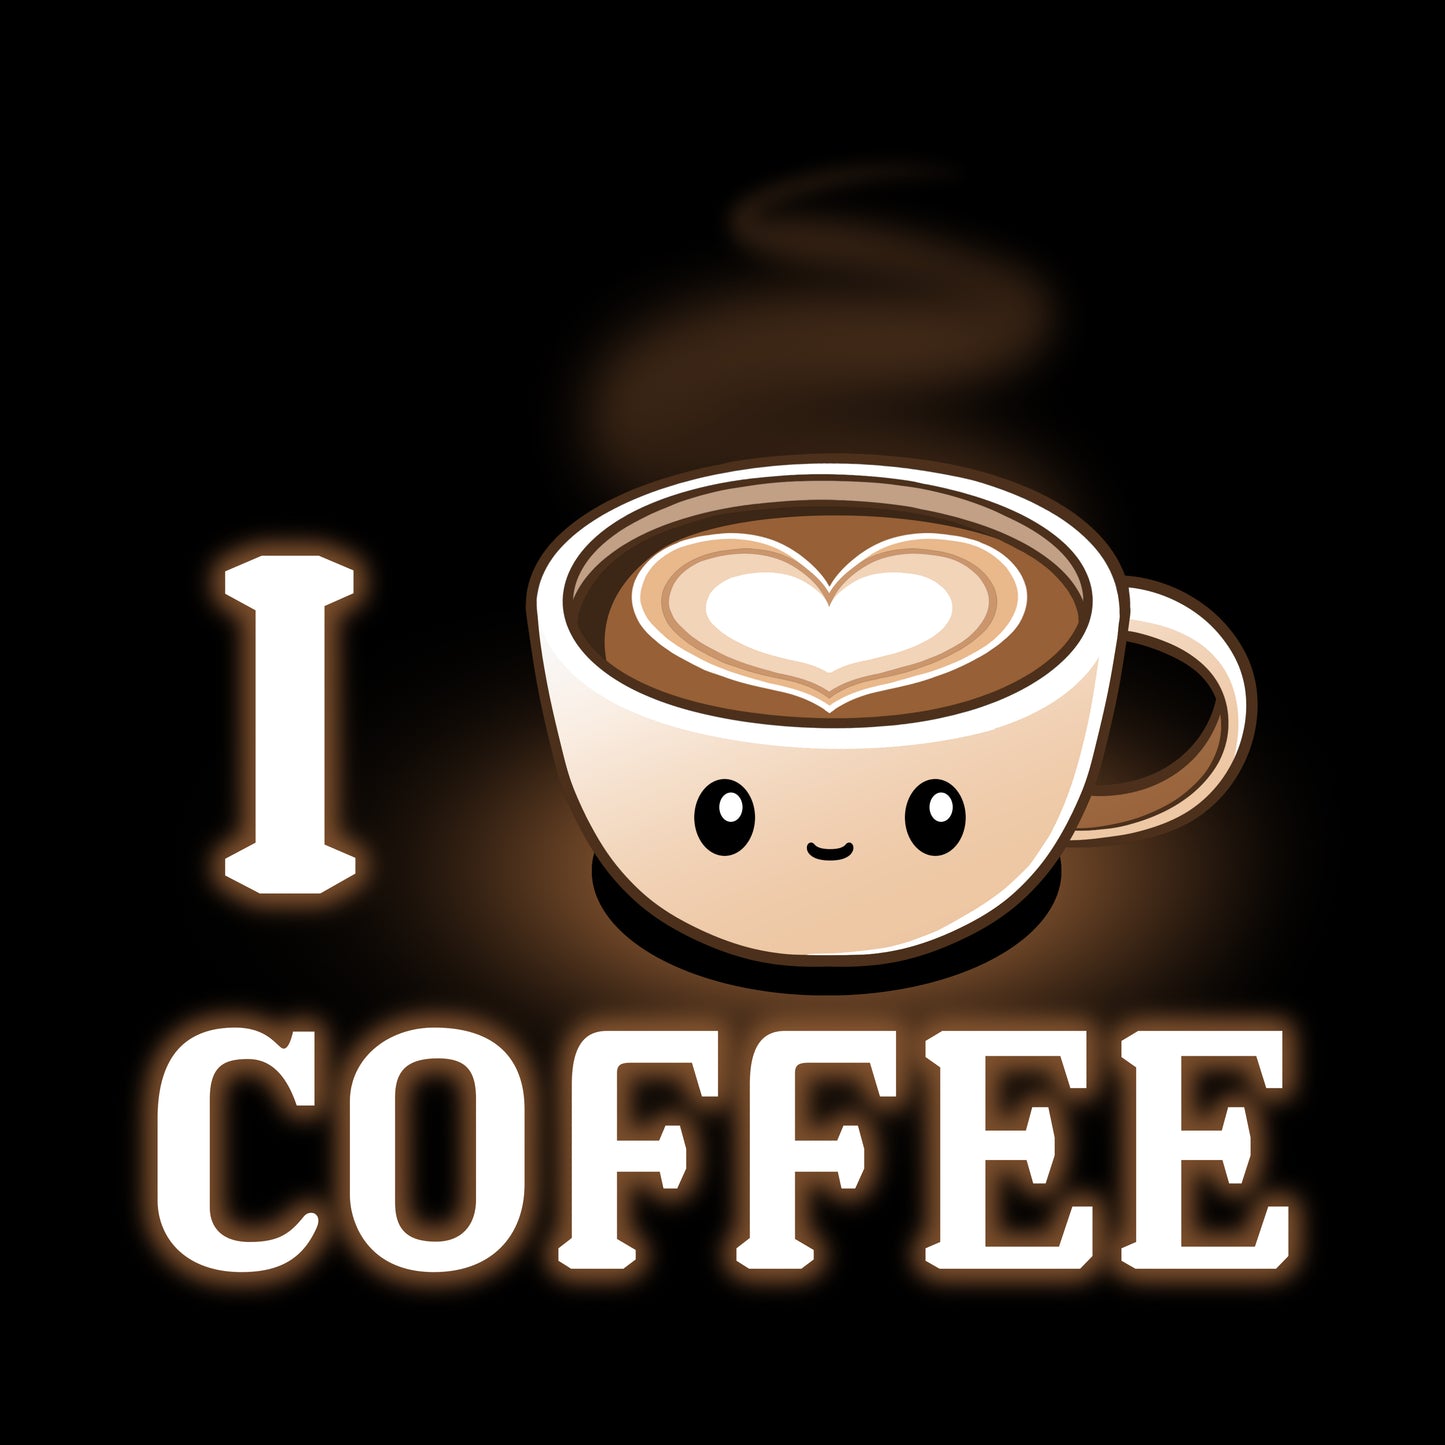 A TeeTurtle t-shirt for men featuring the words "I <3 Coffee.